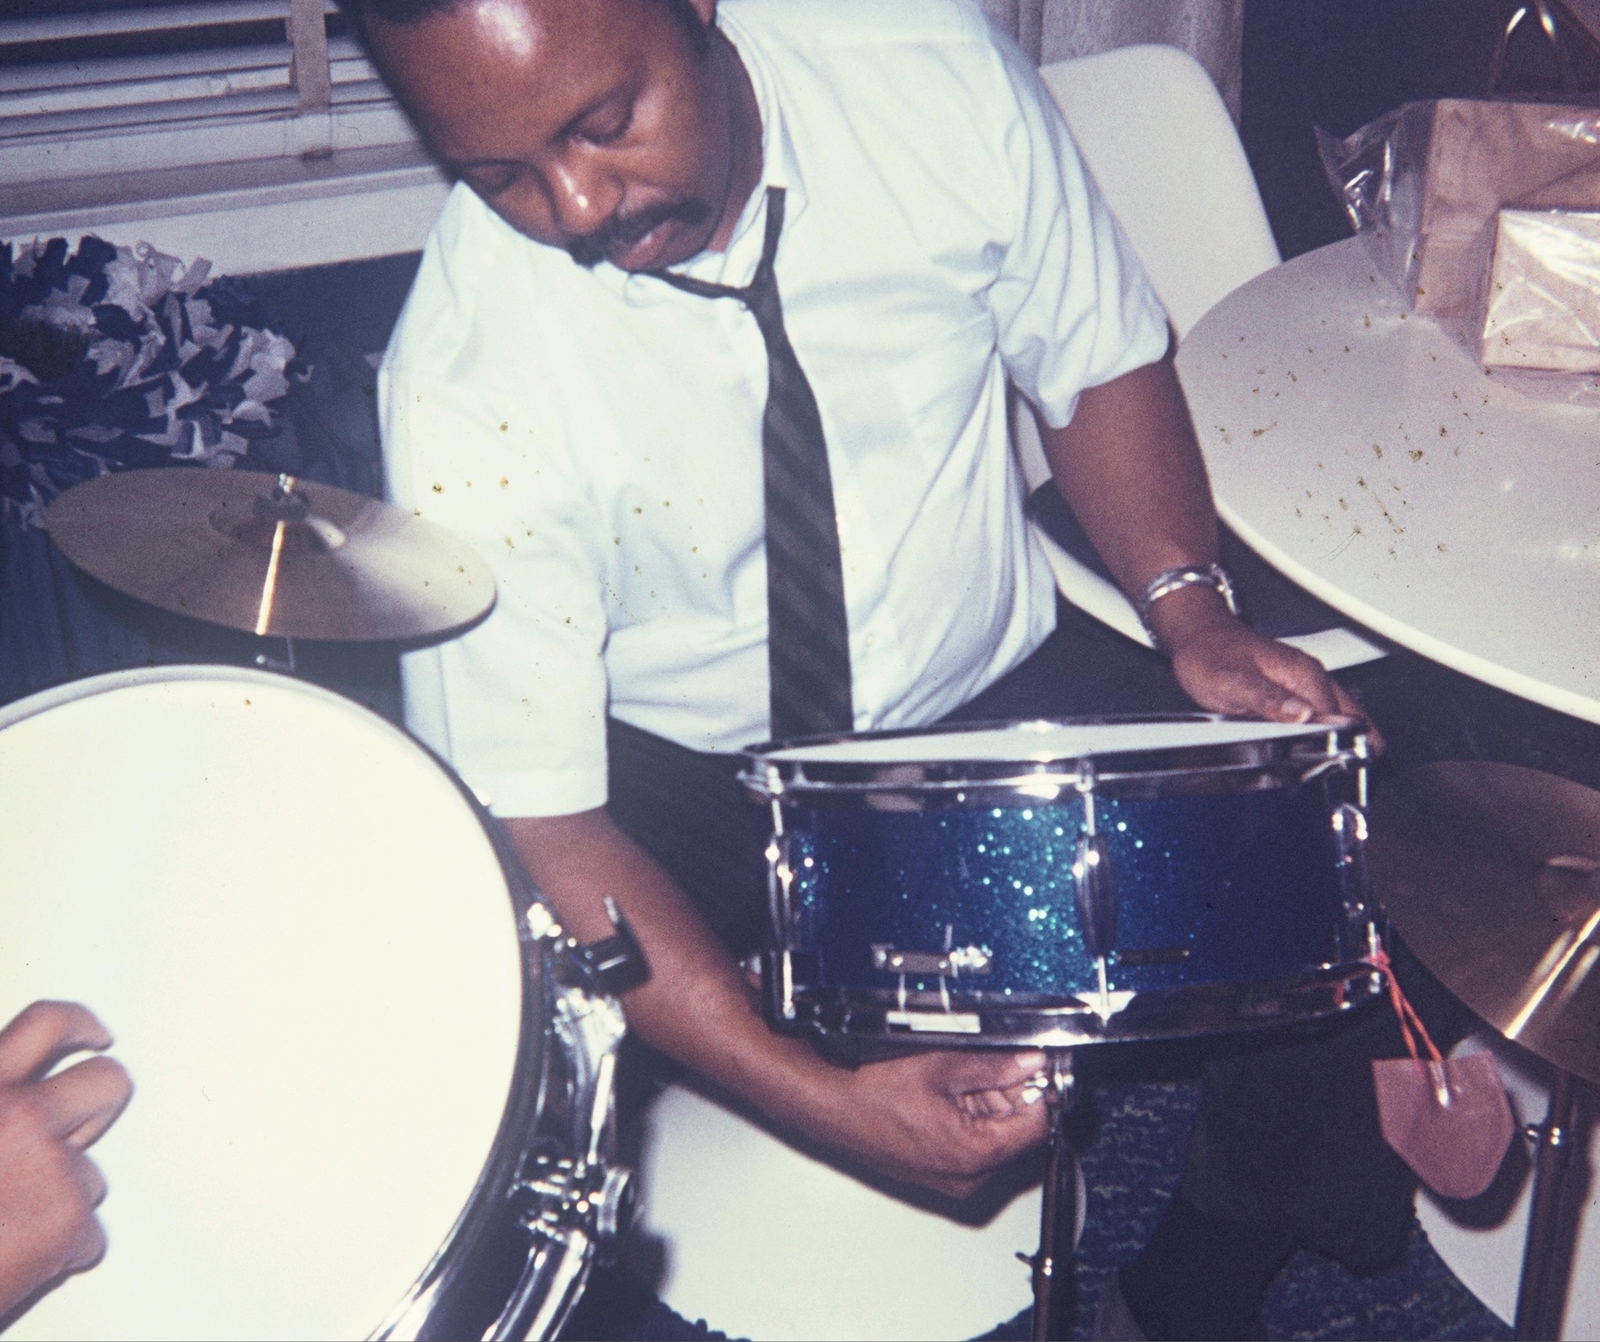 A man behind a drum kit adjusting one of the snare drums